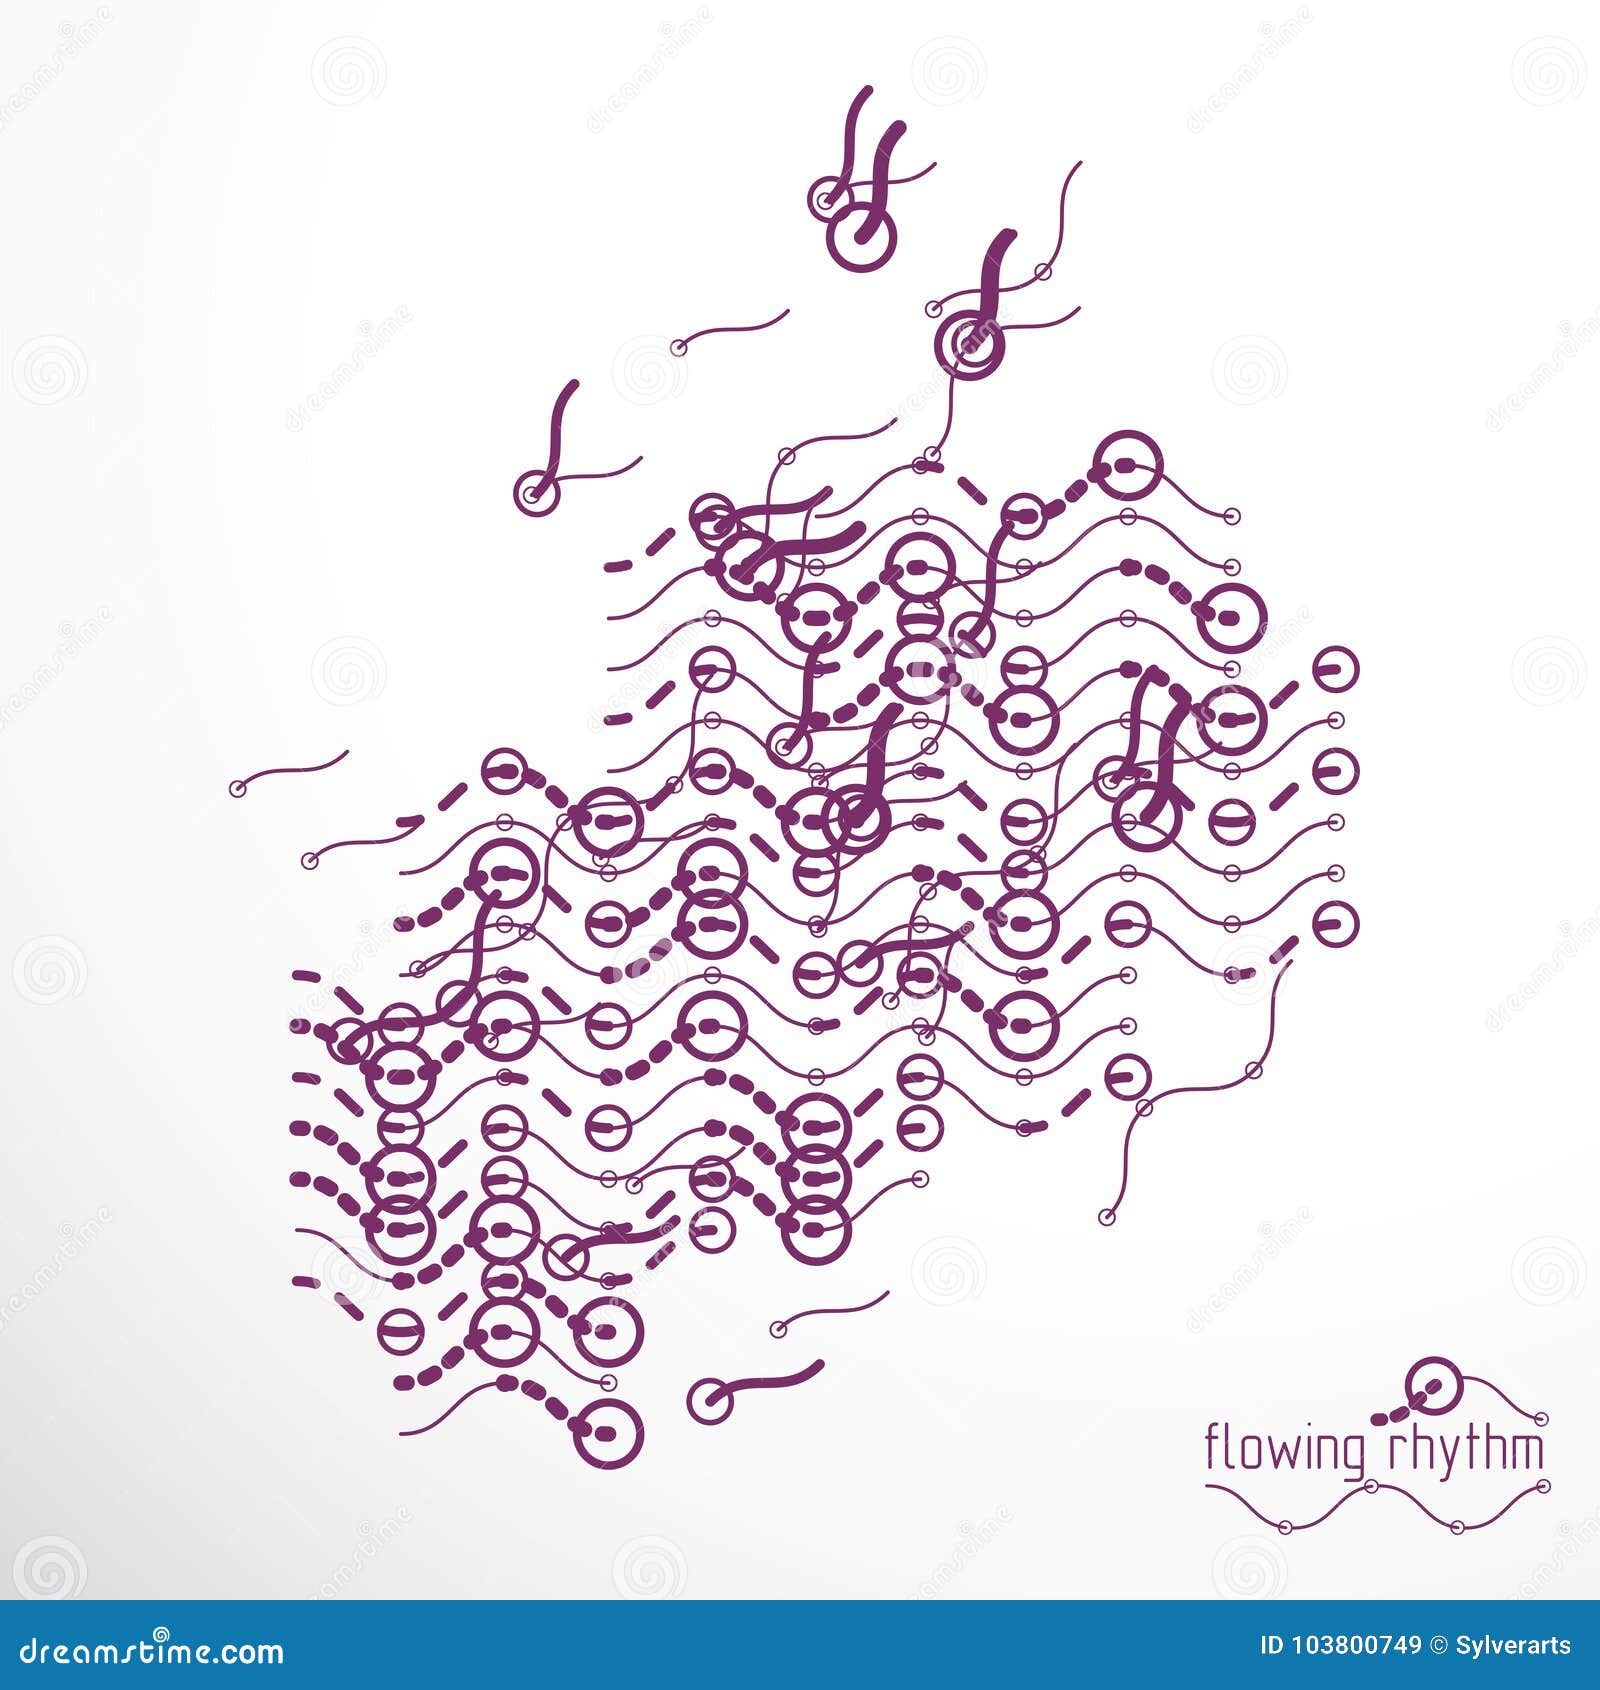 Flowing Rhythm Abstract Wave Lines Vector Background For Use In Illustration Megapixl